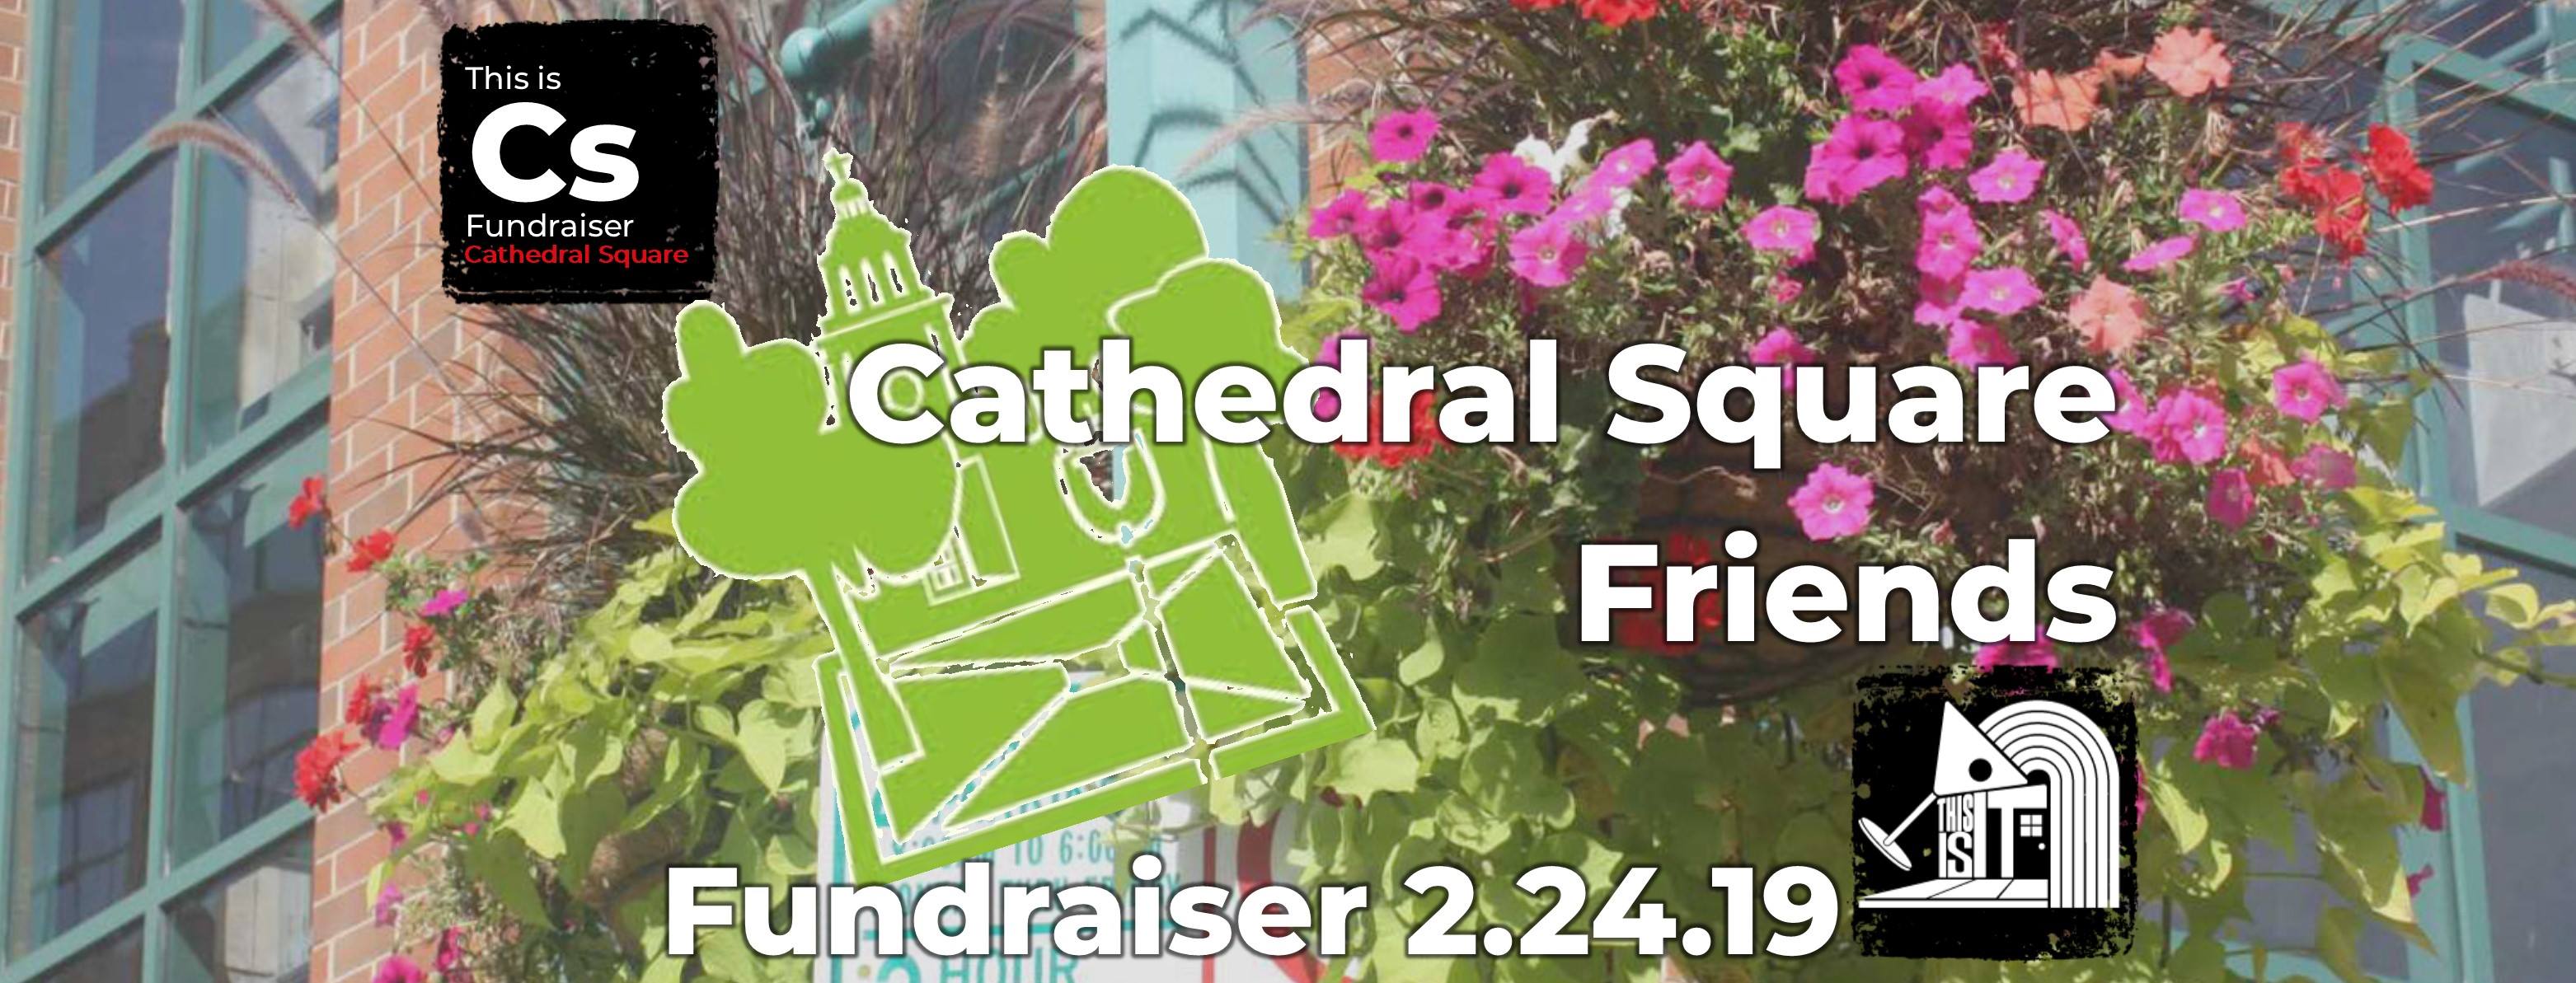 This Is It! Fundraiser For Cathedral Square Friends